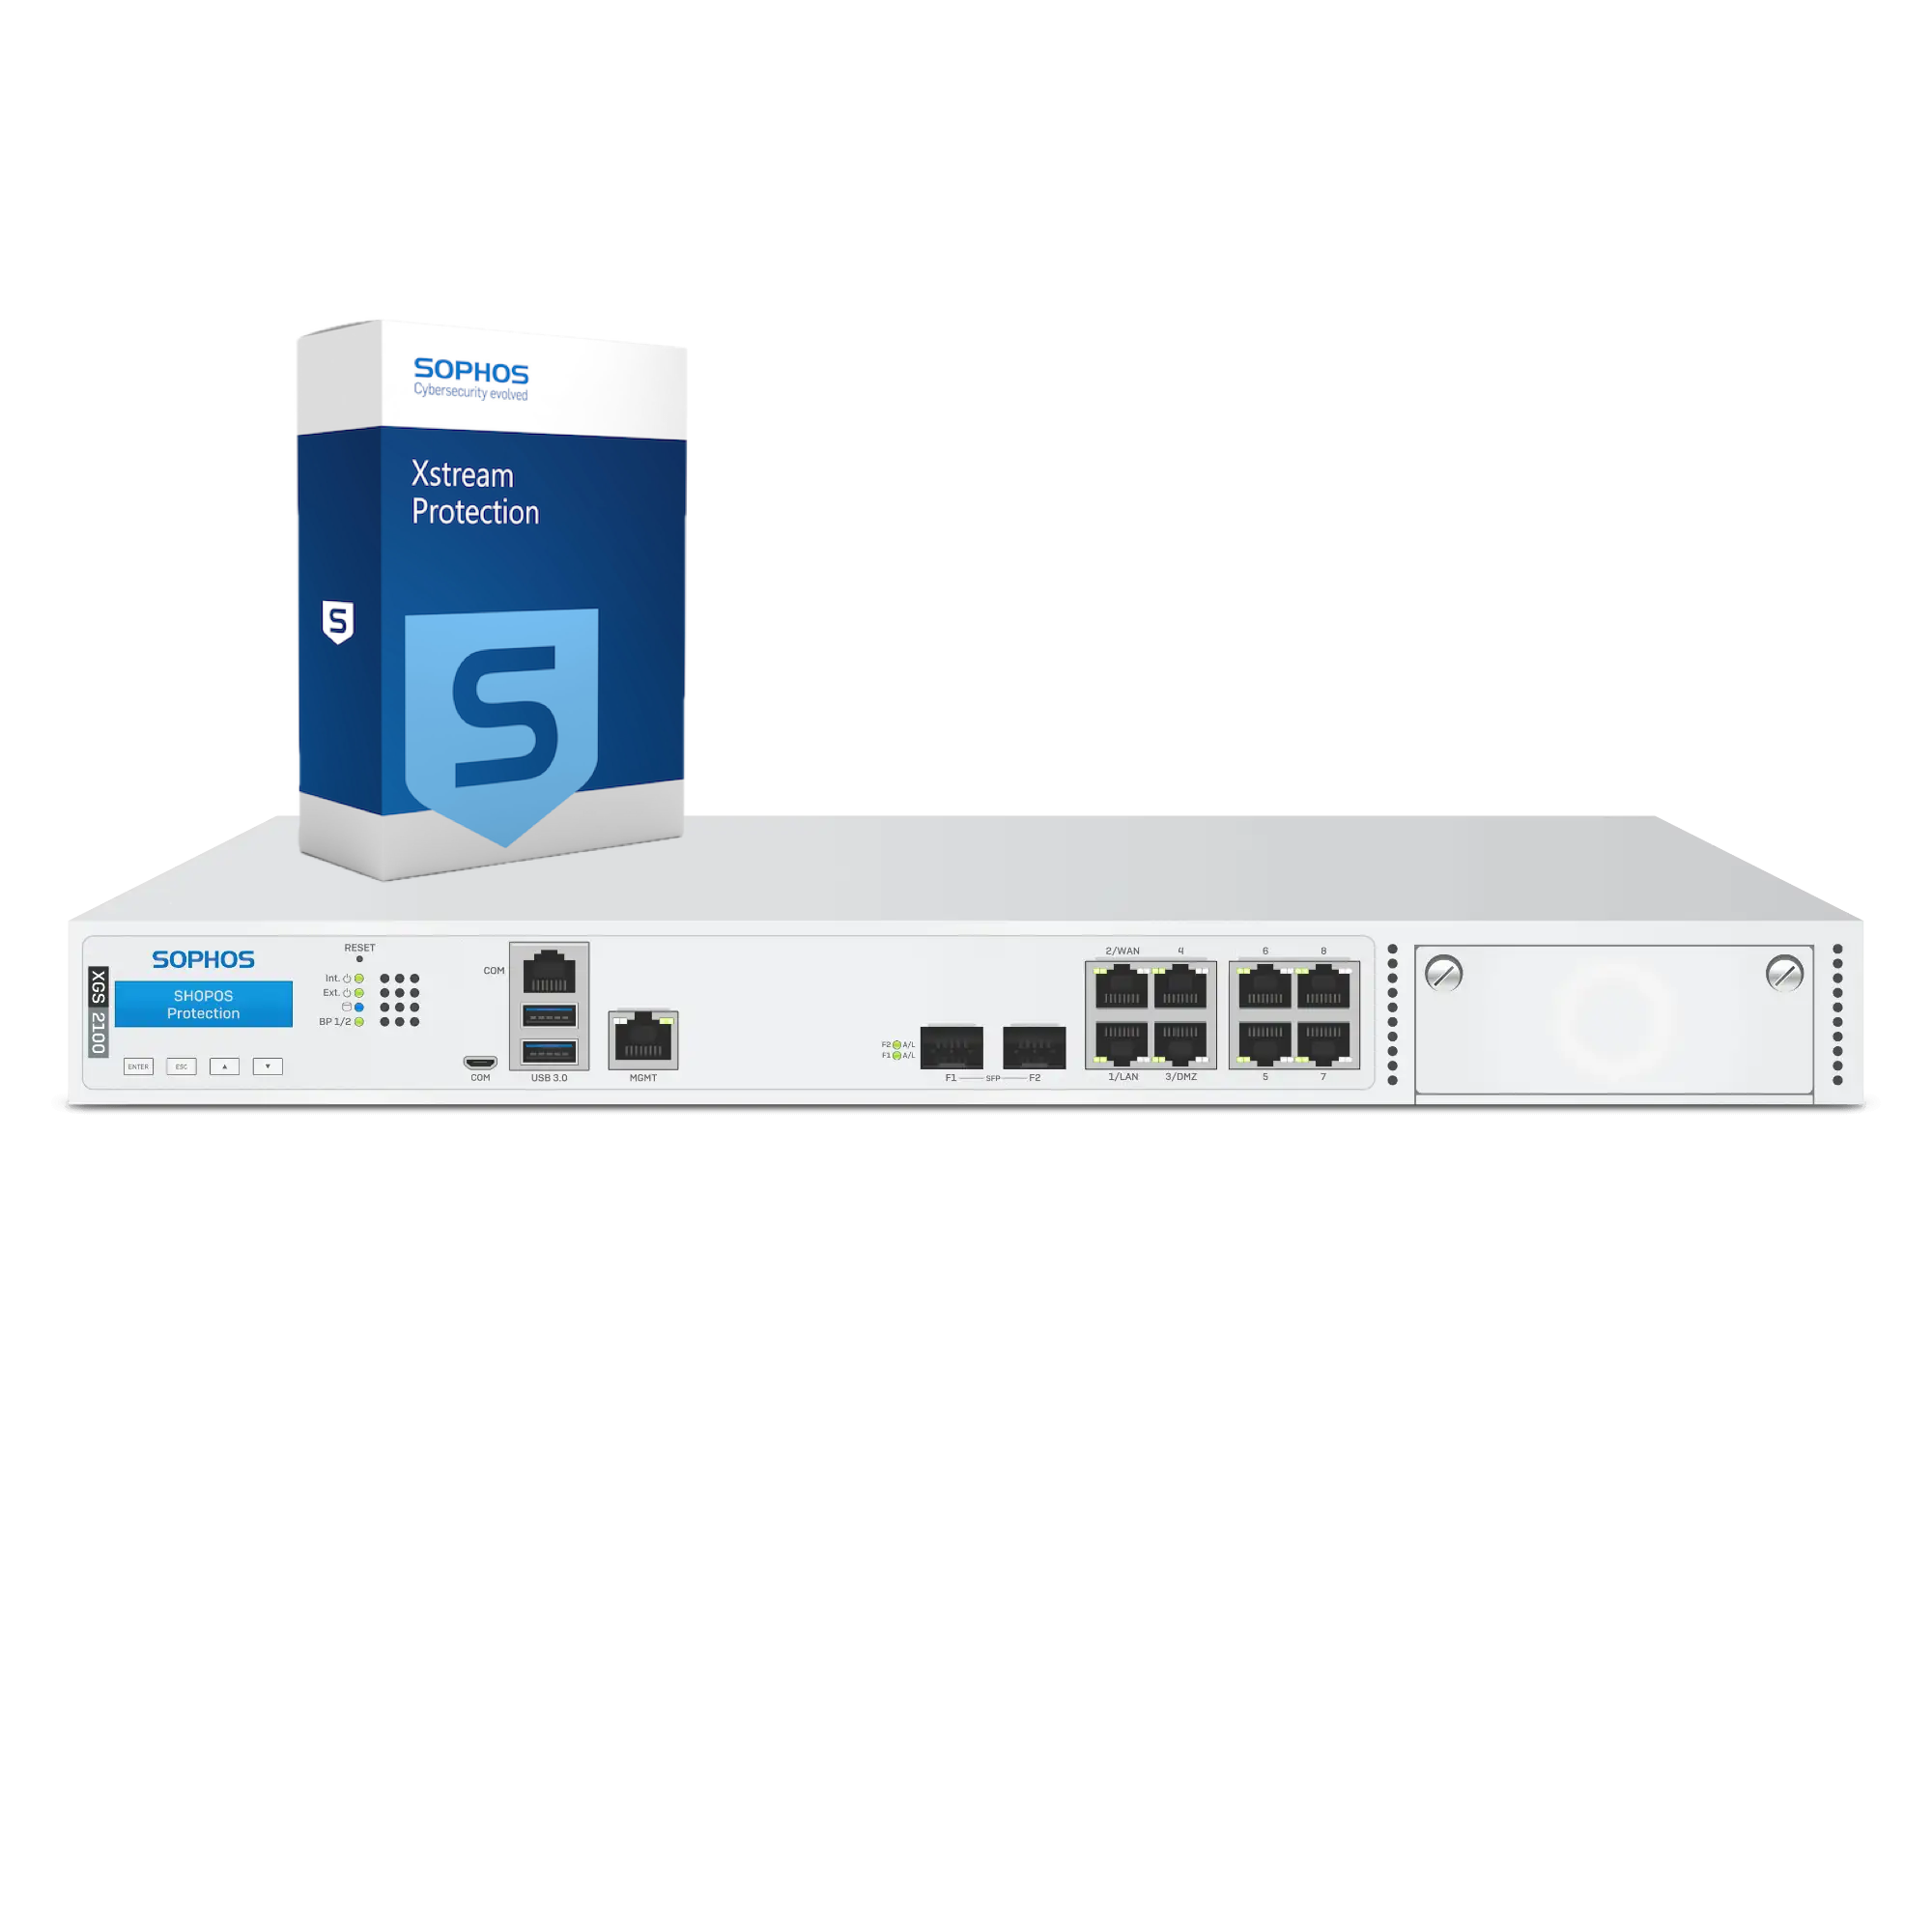 Sophos XGS 2100 Firewall with Xstream Protection, 3-year - EU power cord